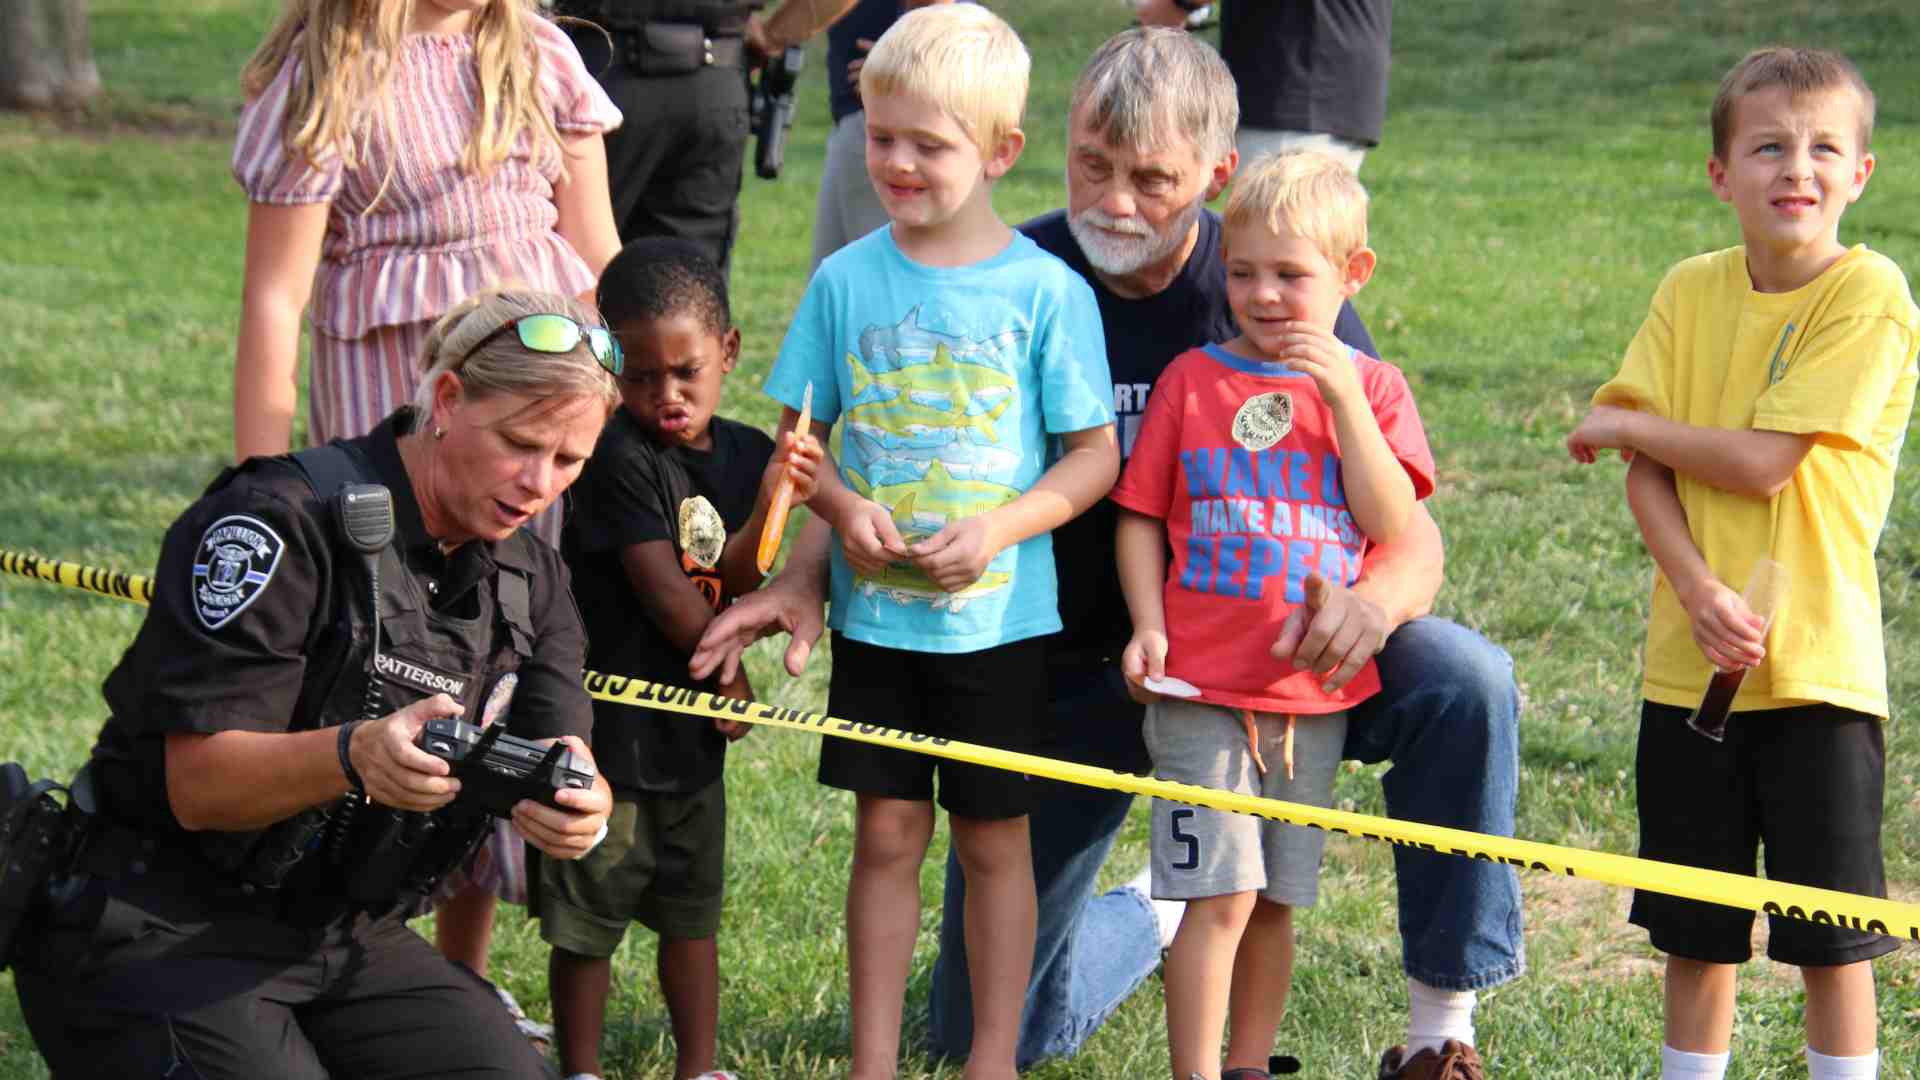 papillion community policing works